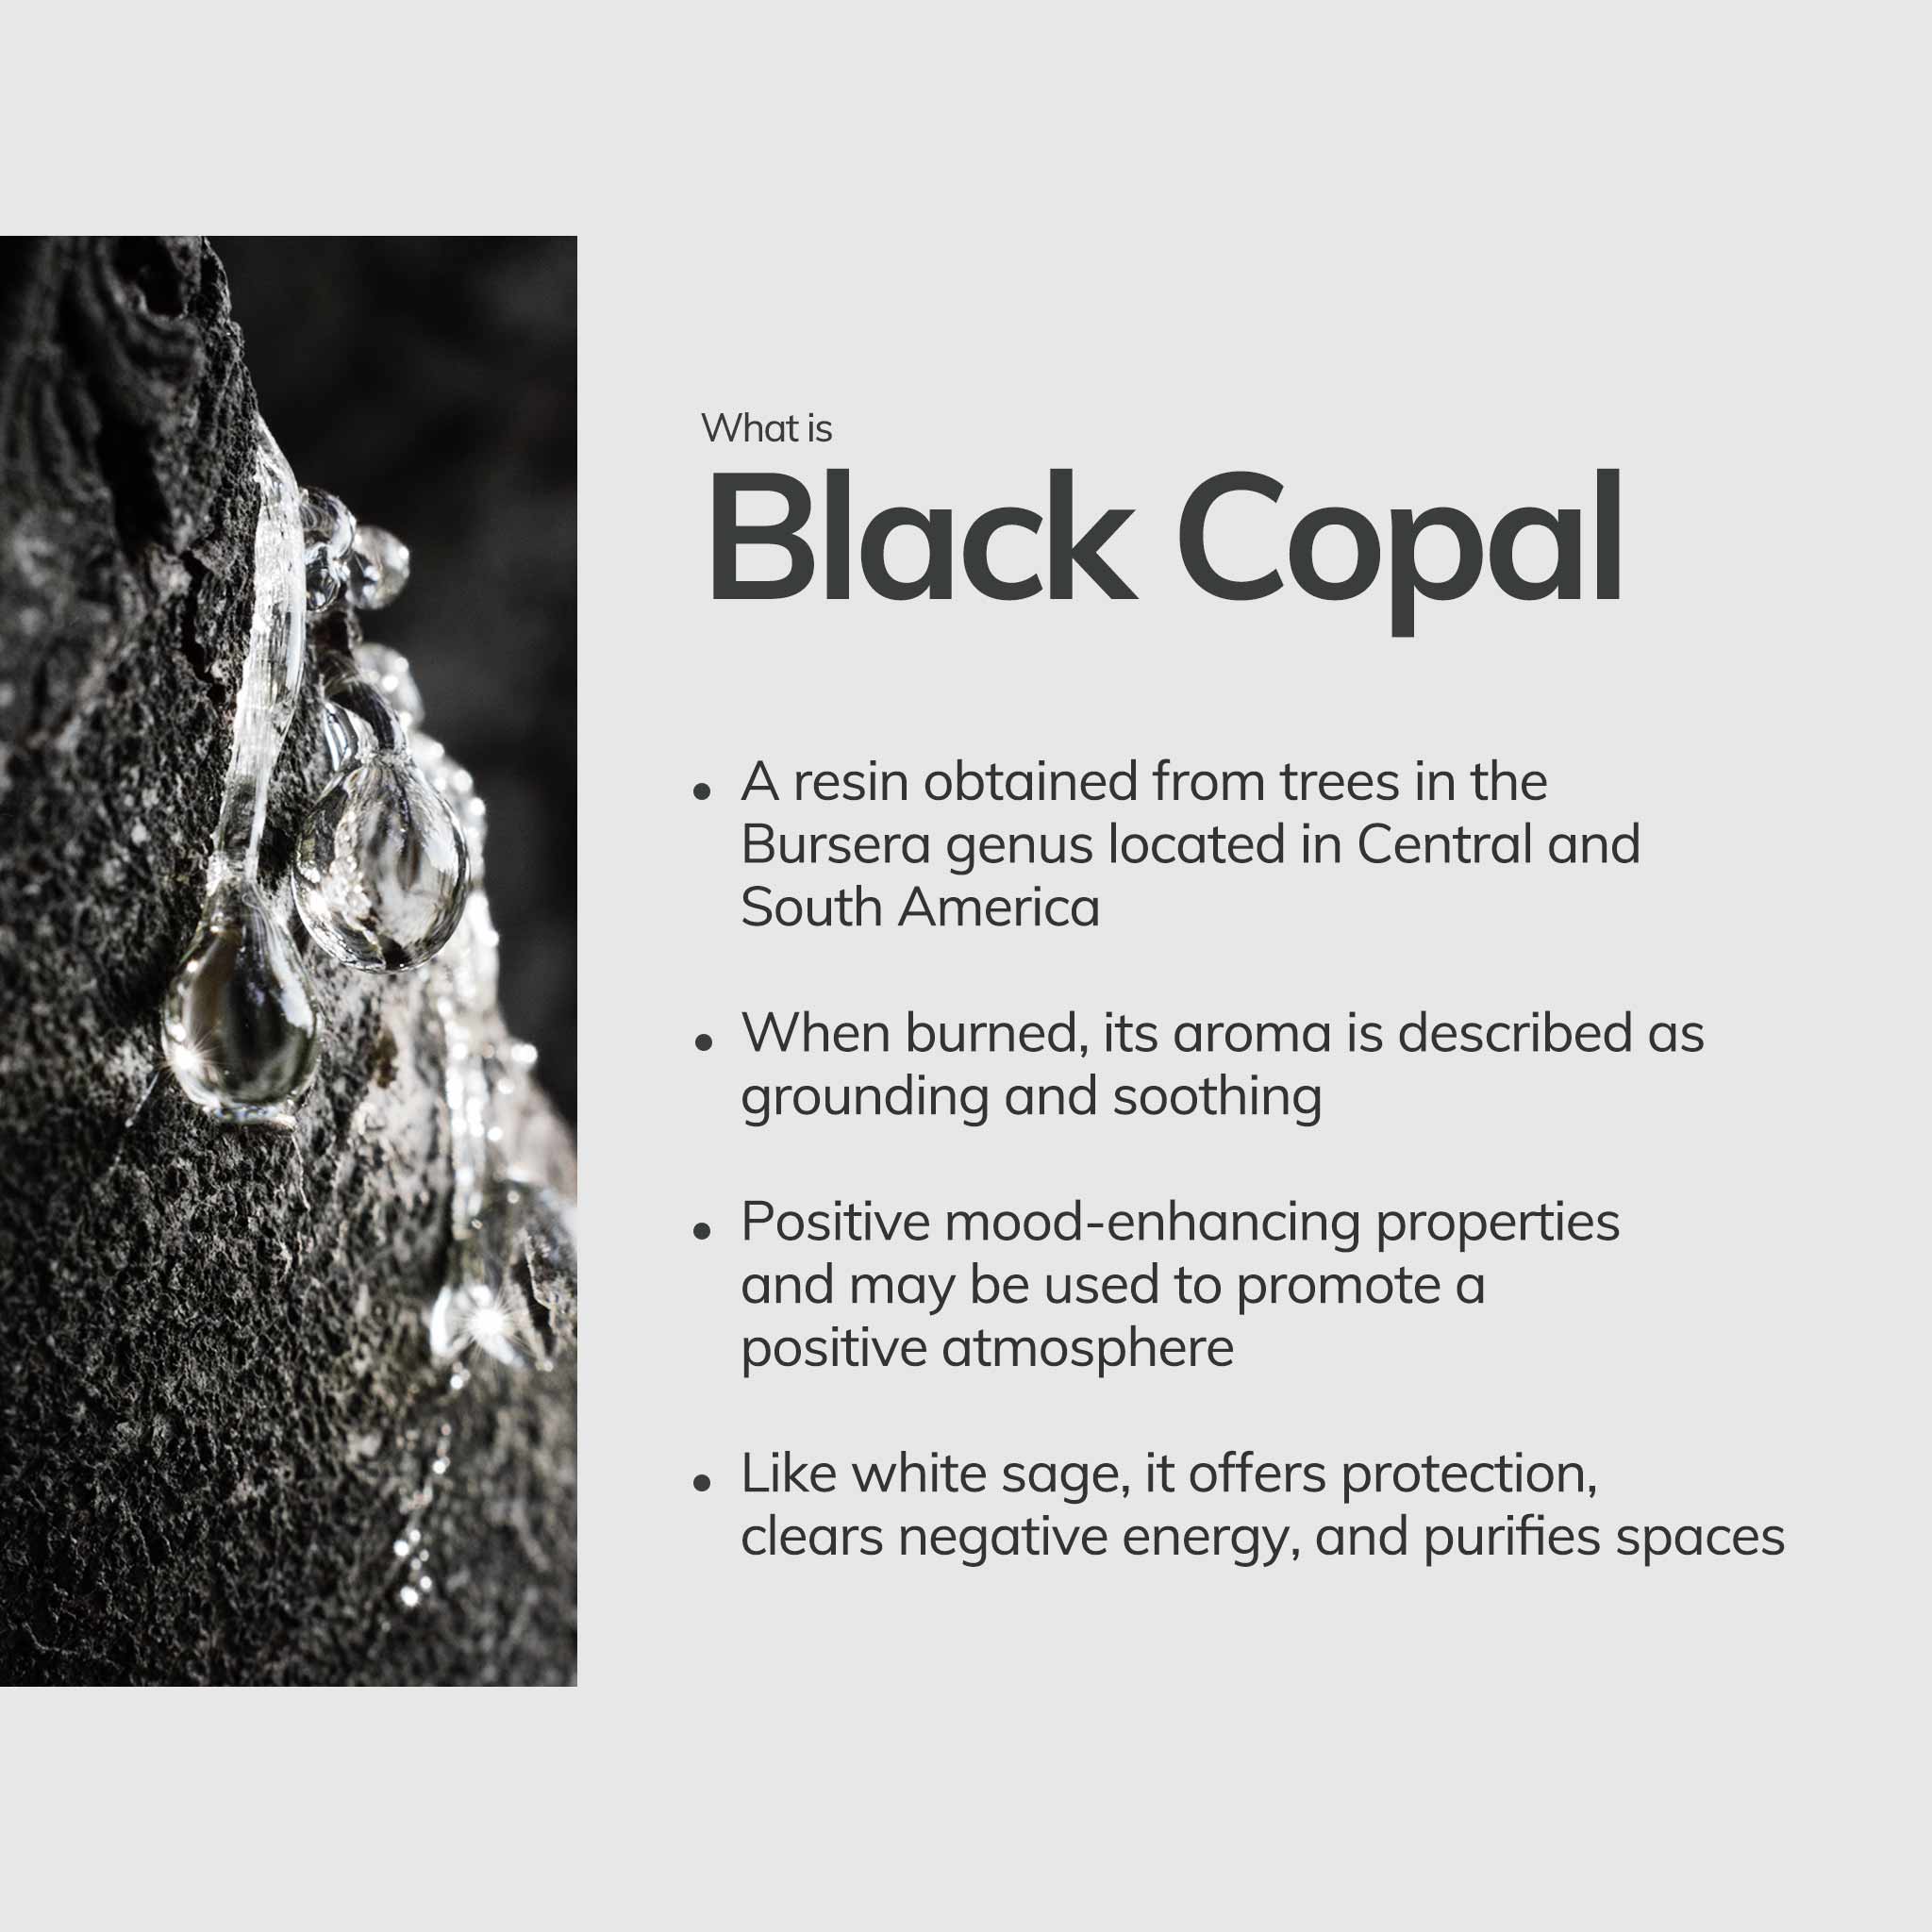 Left: copal resin from a tree; Right: bullet list telling what is black copal is used for.